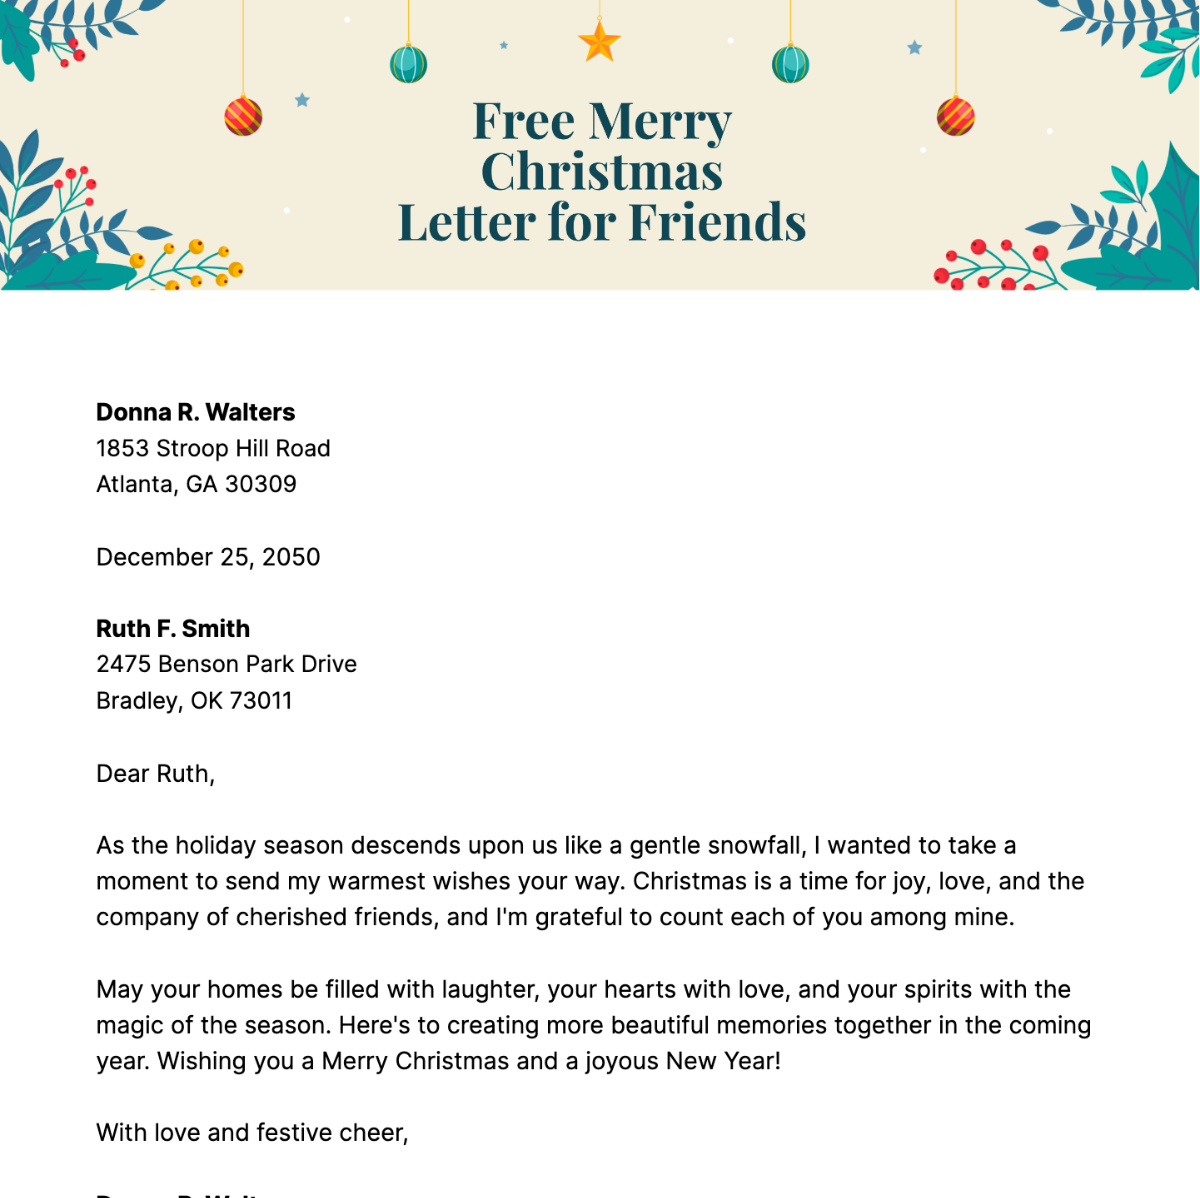 Merry Christmas Letter for Friends Template